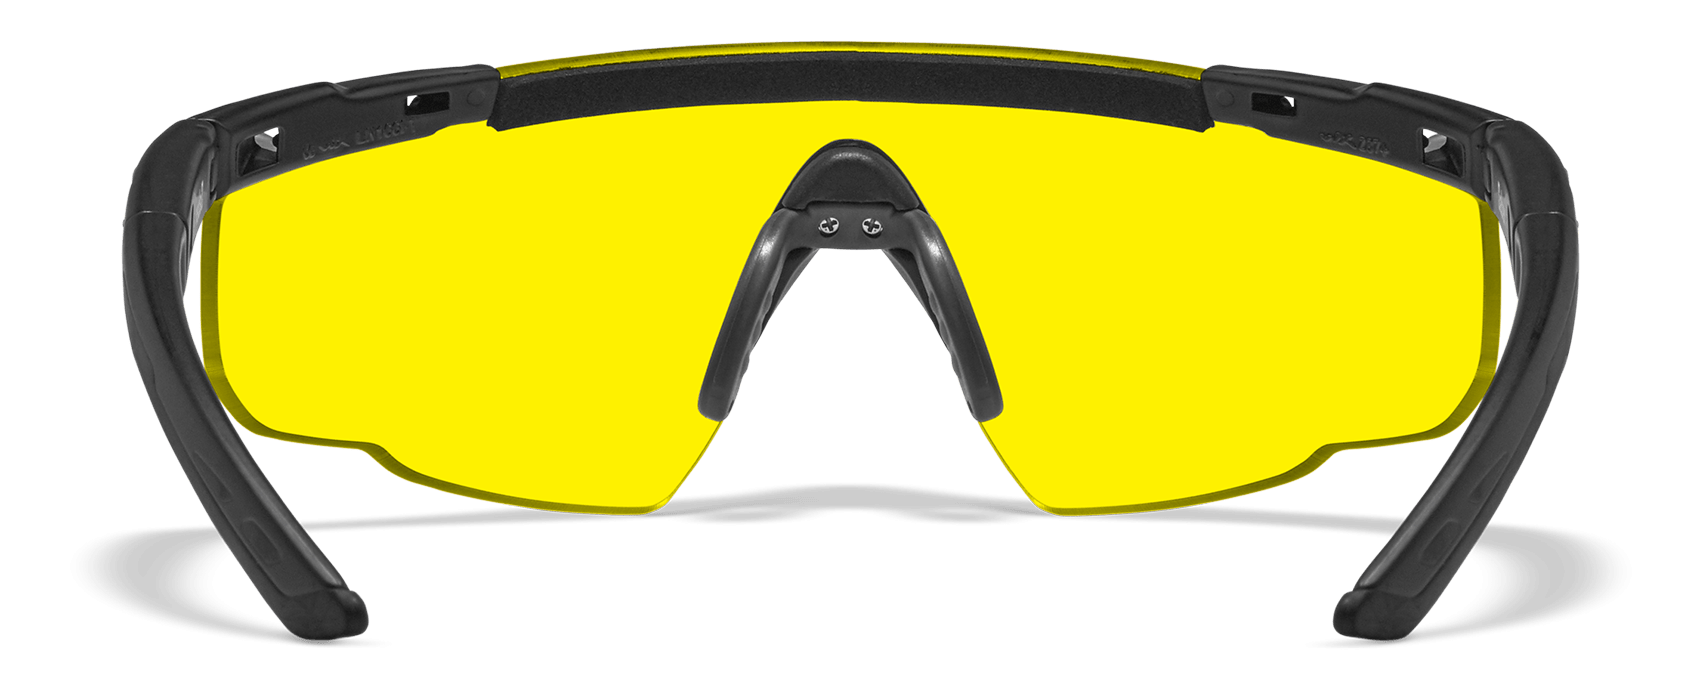 Wiley X Saber Advanced Ballistic Safety Glasses with Matte Black Frame and Pale Yellow Lenses